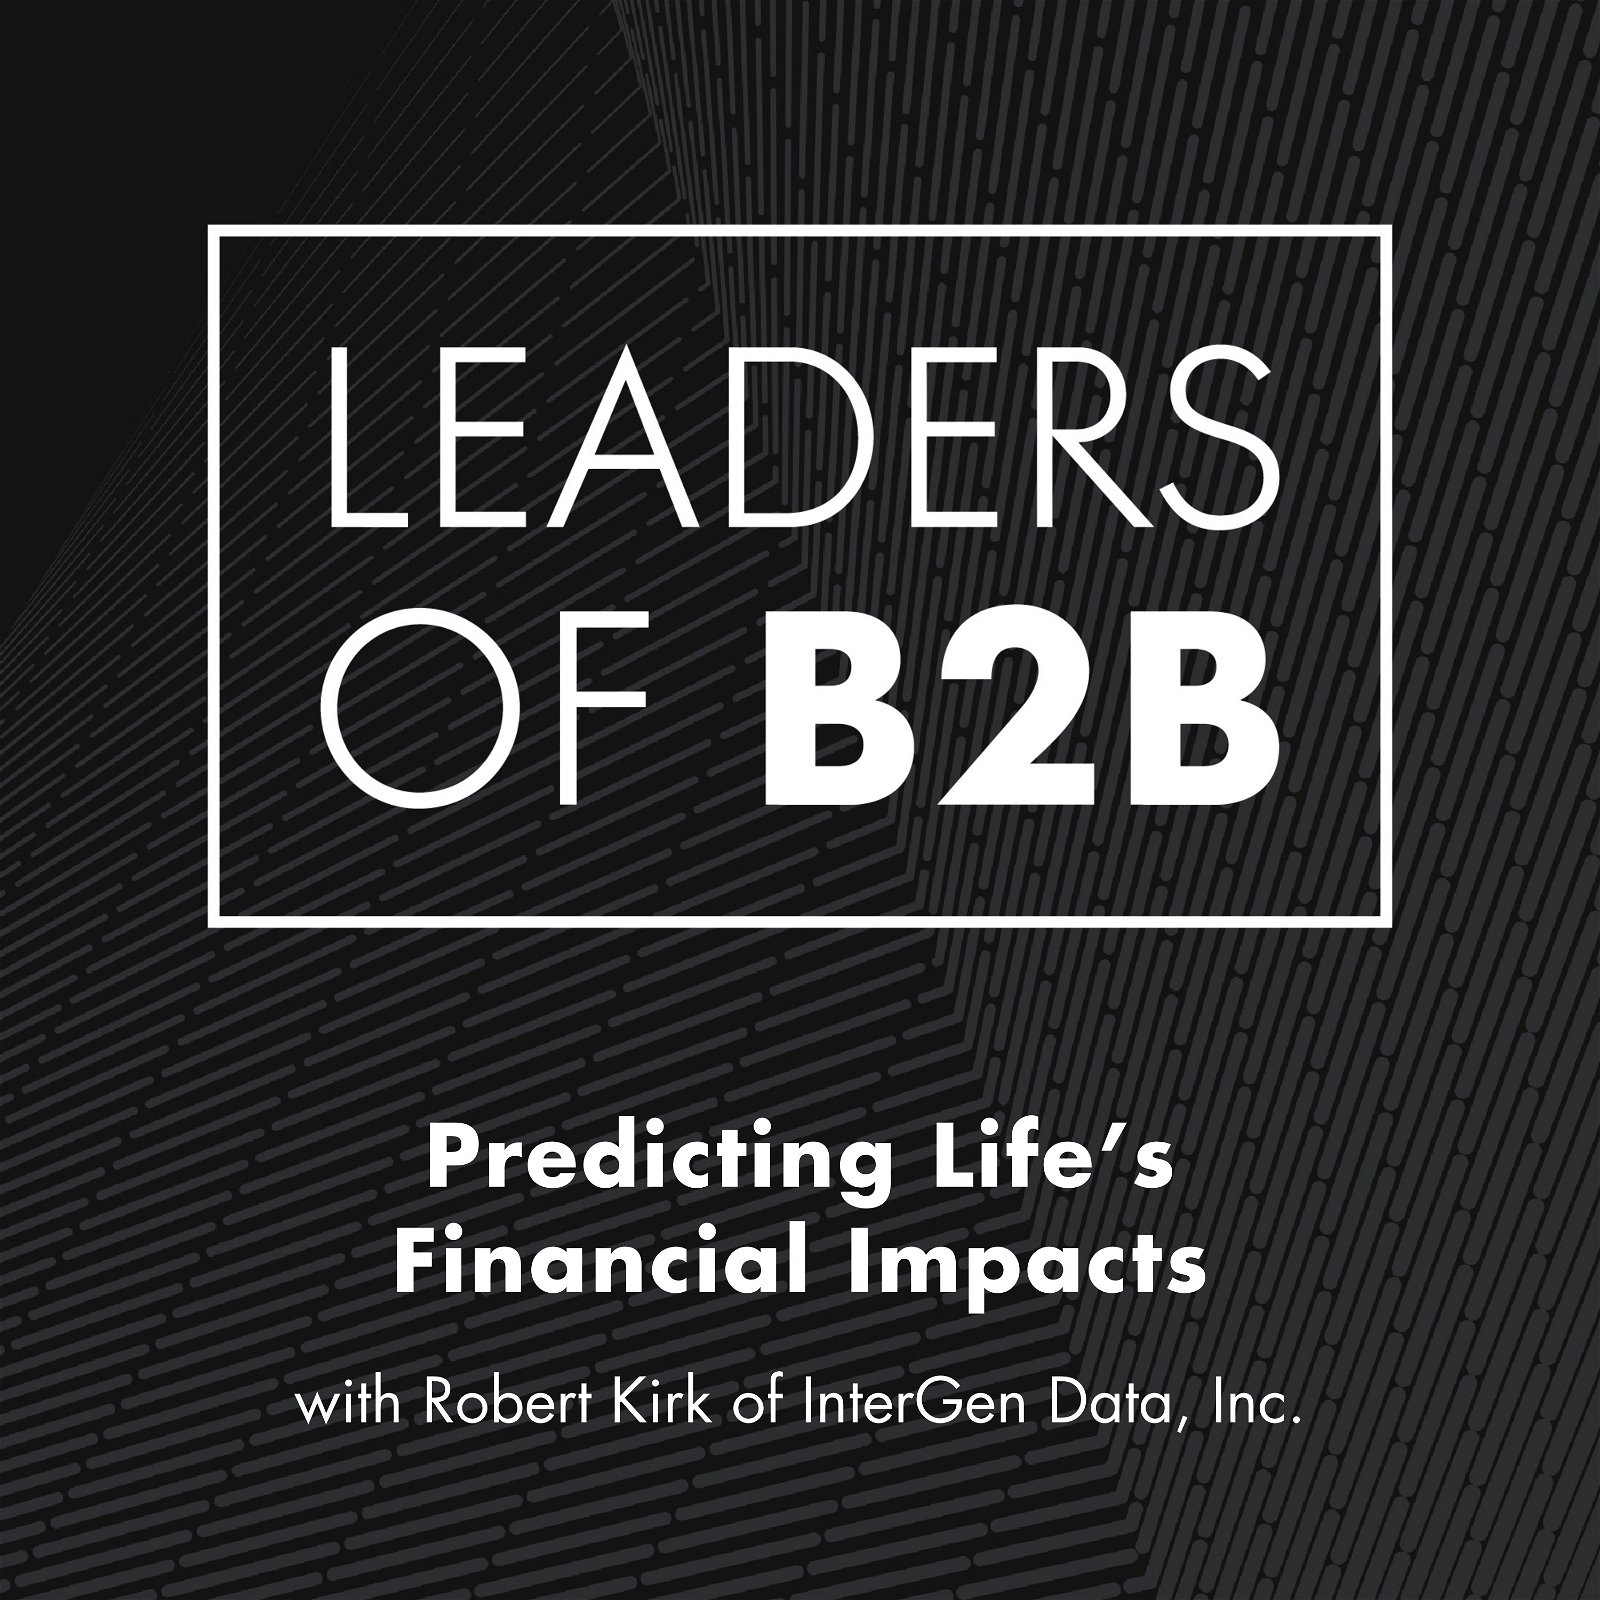 Predicting Life’s Financial Impacts with Robert Kirk of InterGen Data, Inc.